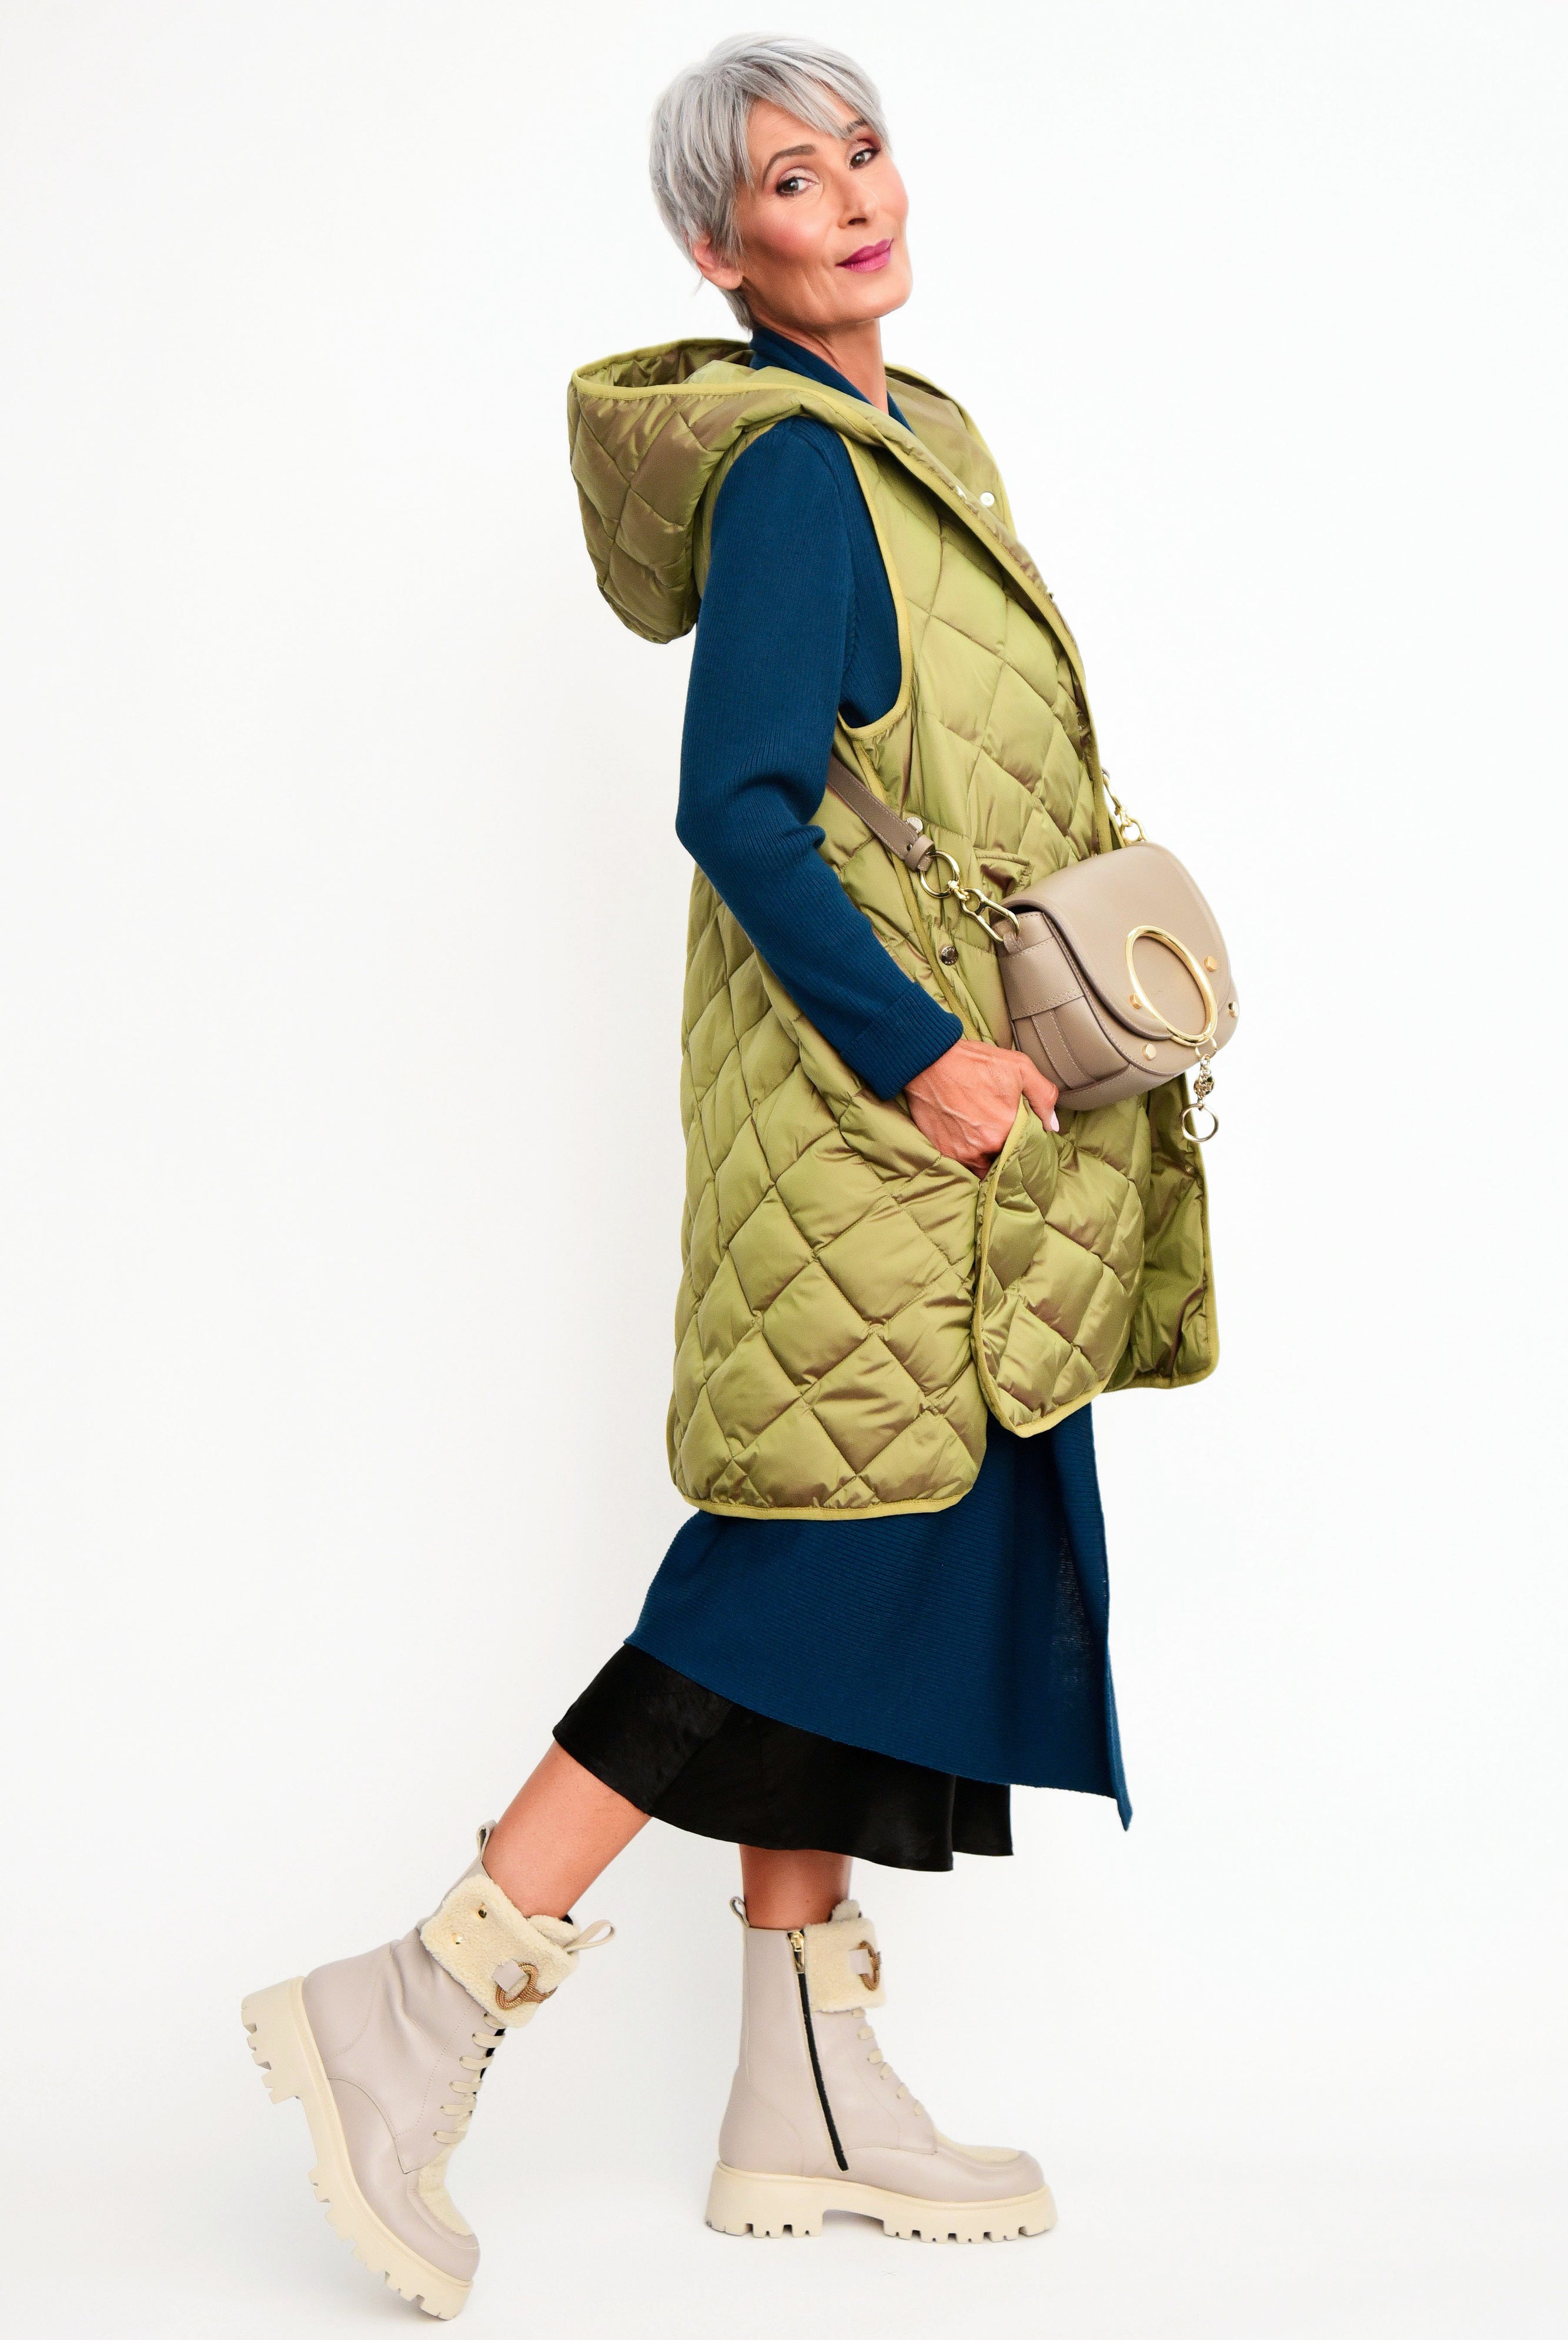 MOKÉ Mae Quilted Long Vest - Avocado - Magpie Style